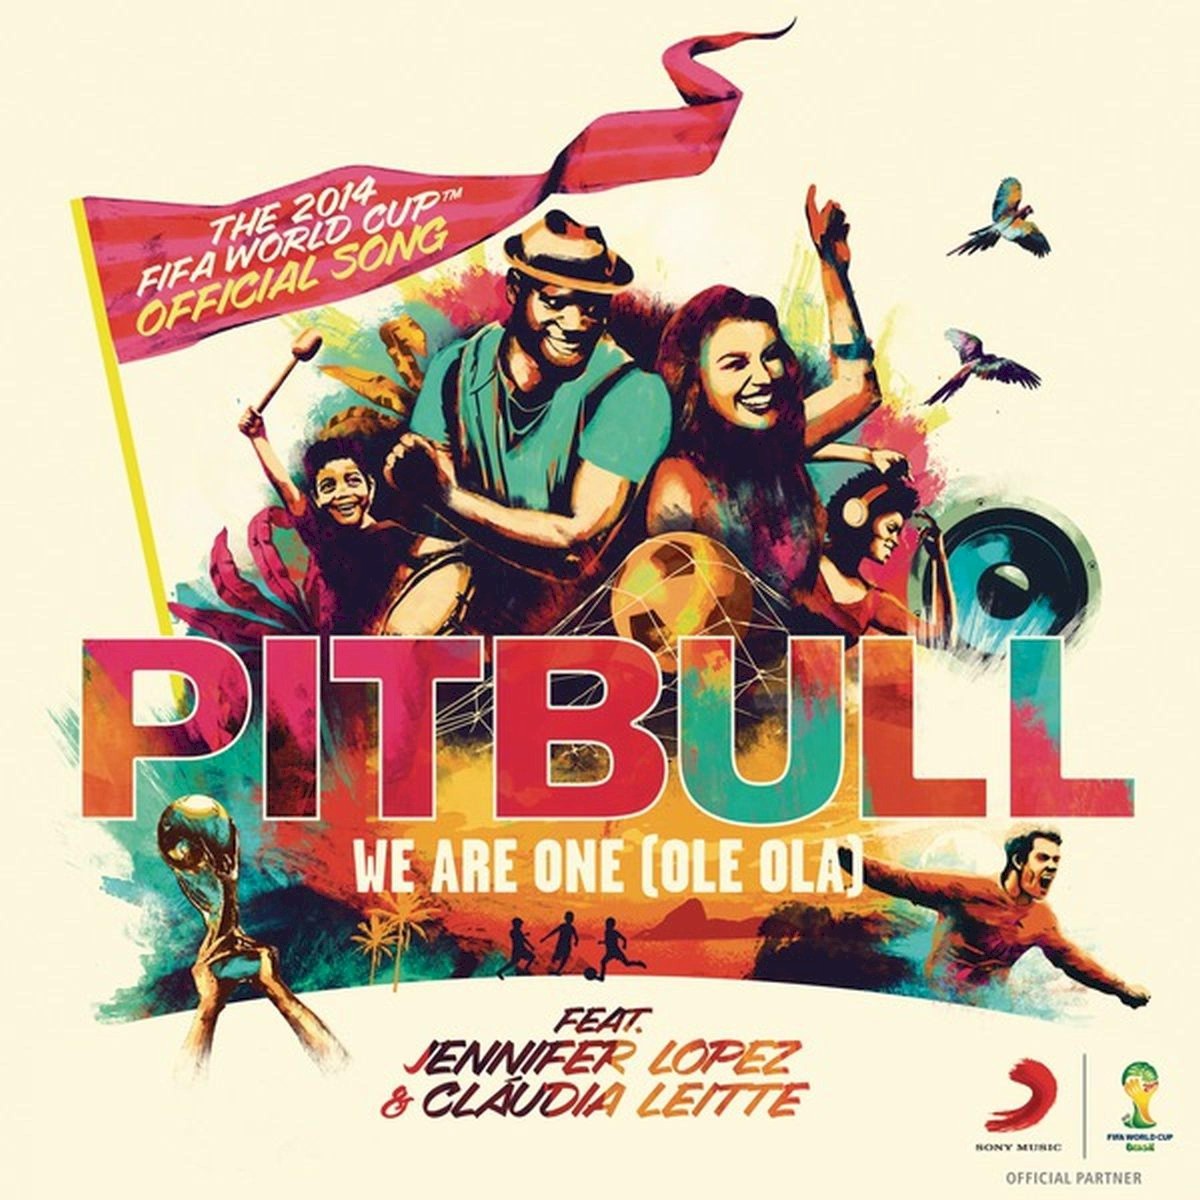 Pitbull featuring Jennifer Lopez & Claudia Leitte — We Are One (Ole Ola) [The Official 2014 FIFA World Cup Song] cover artwork